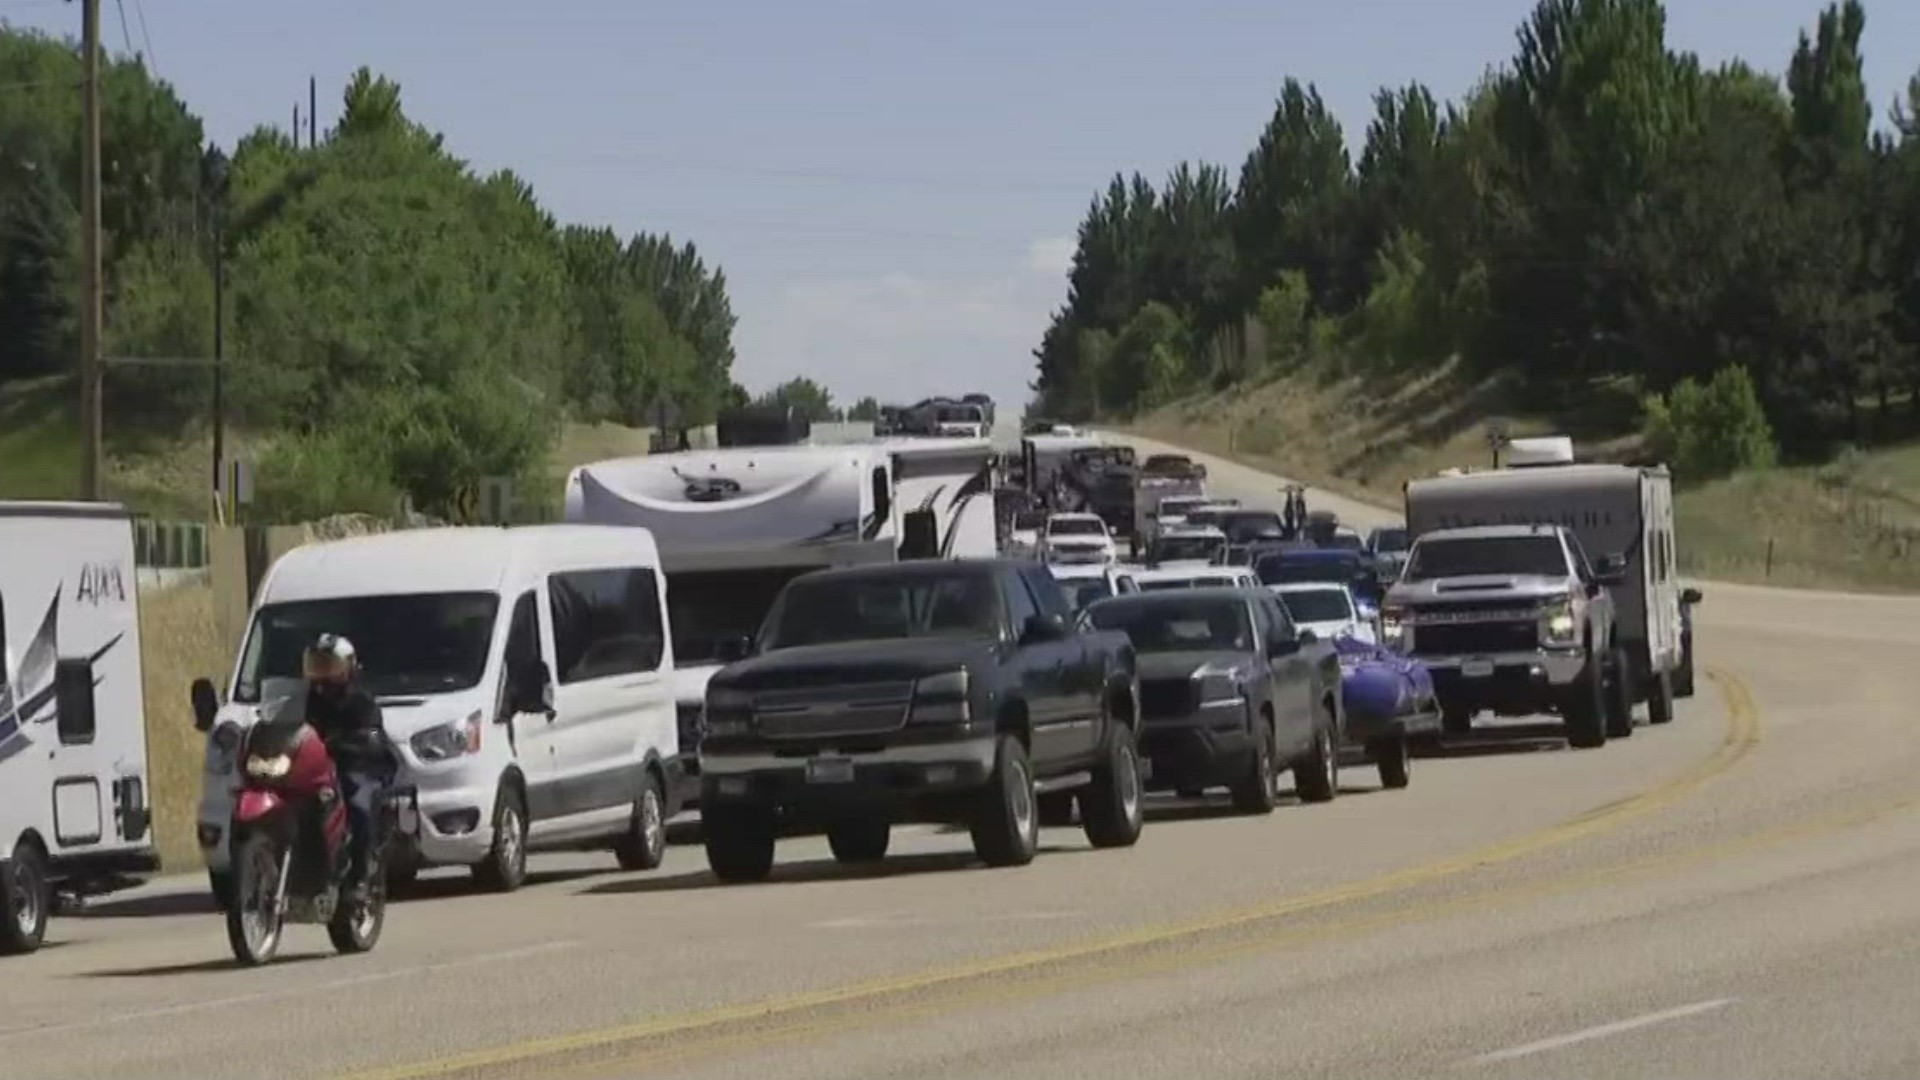 As many Idahoans prepare to travel for the holiday, Memorial Day is the start of a dangerous time on roads throughout the Gem State.